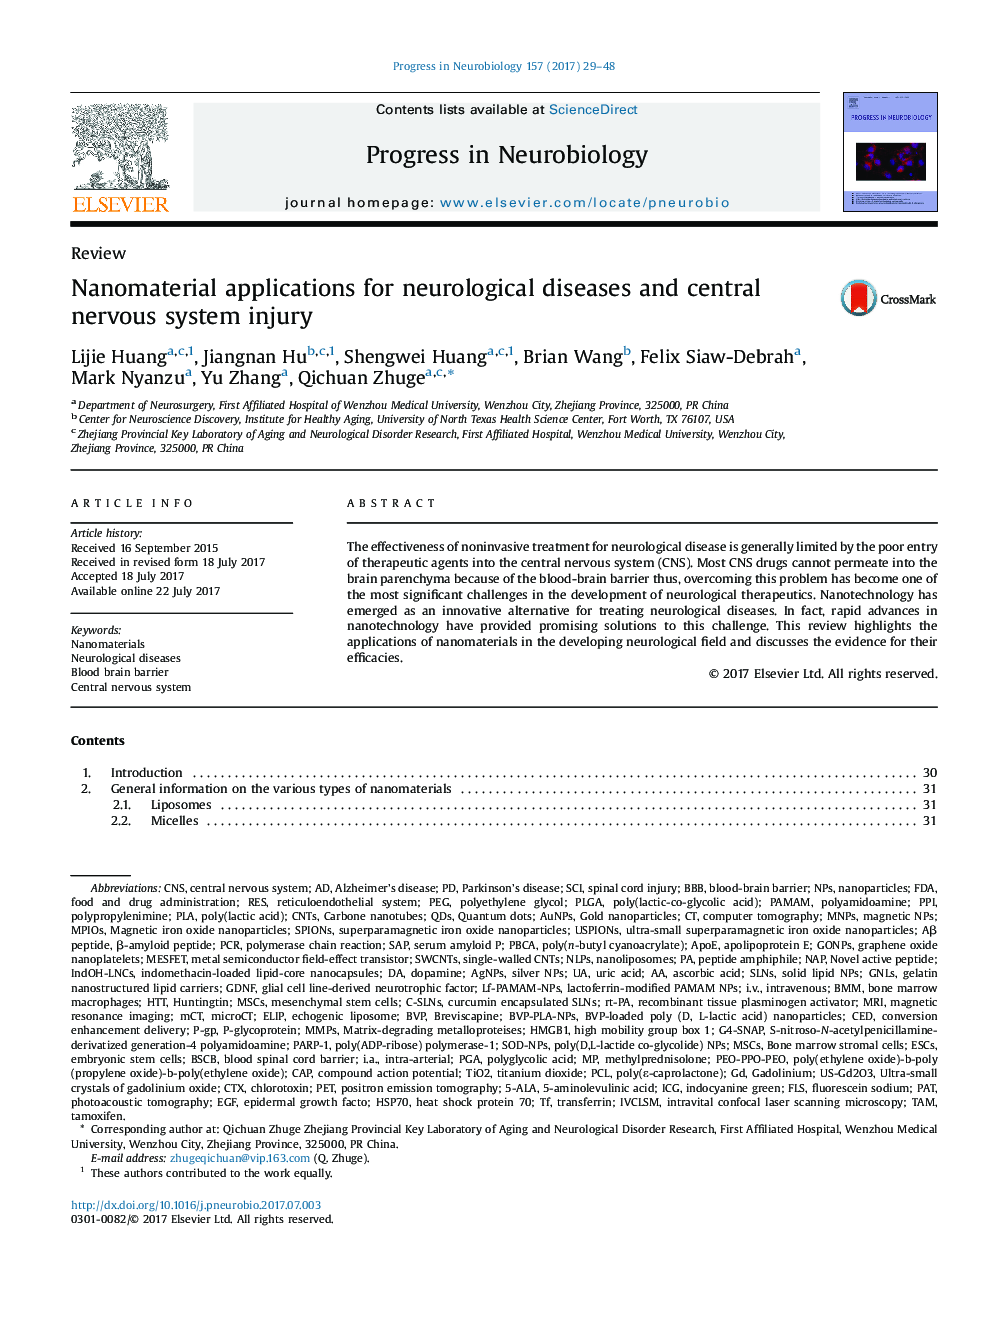 Review articleNanomaterial applications for neurological diseases and central nervous system injury